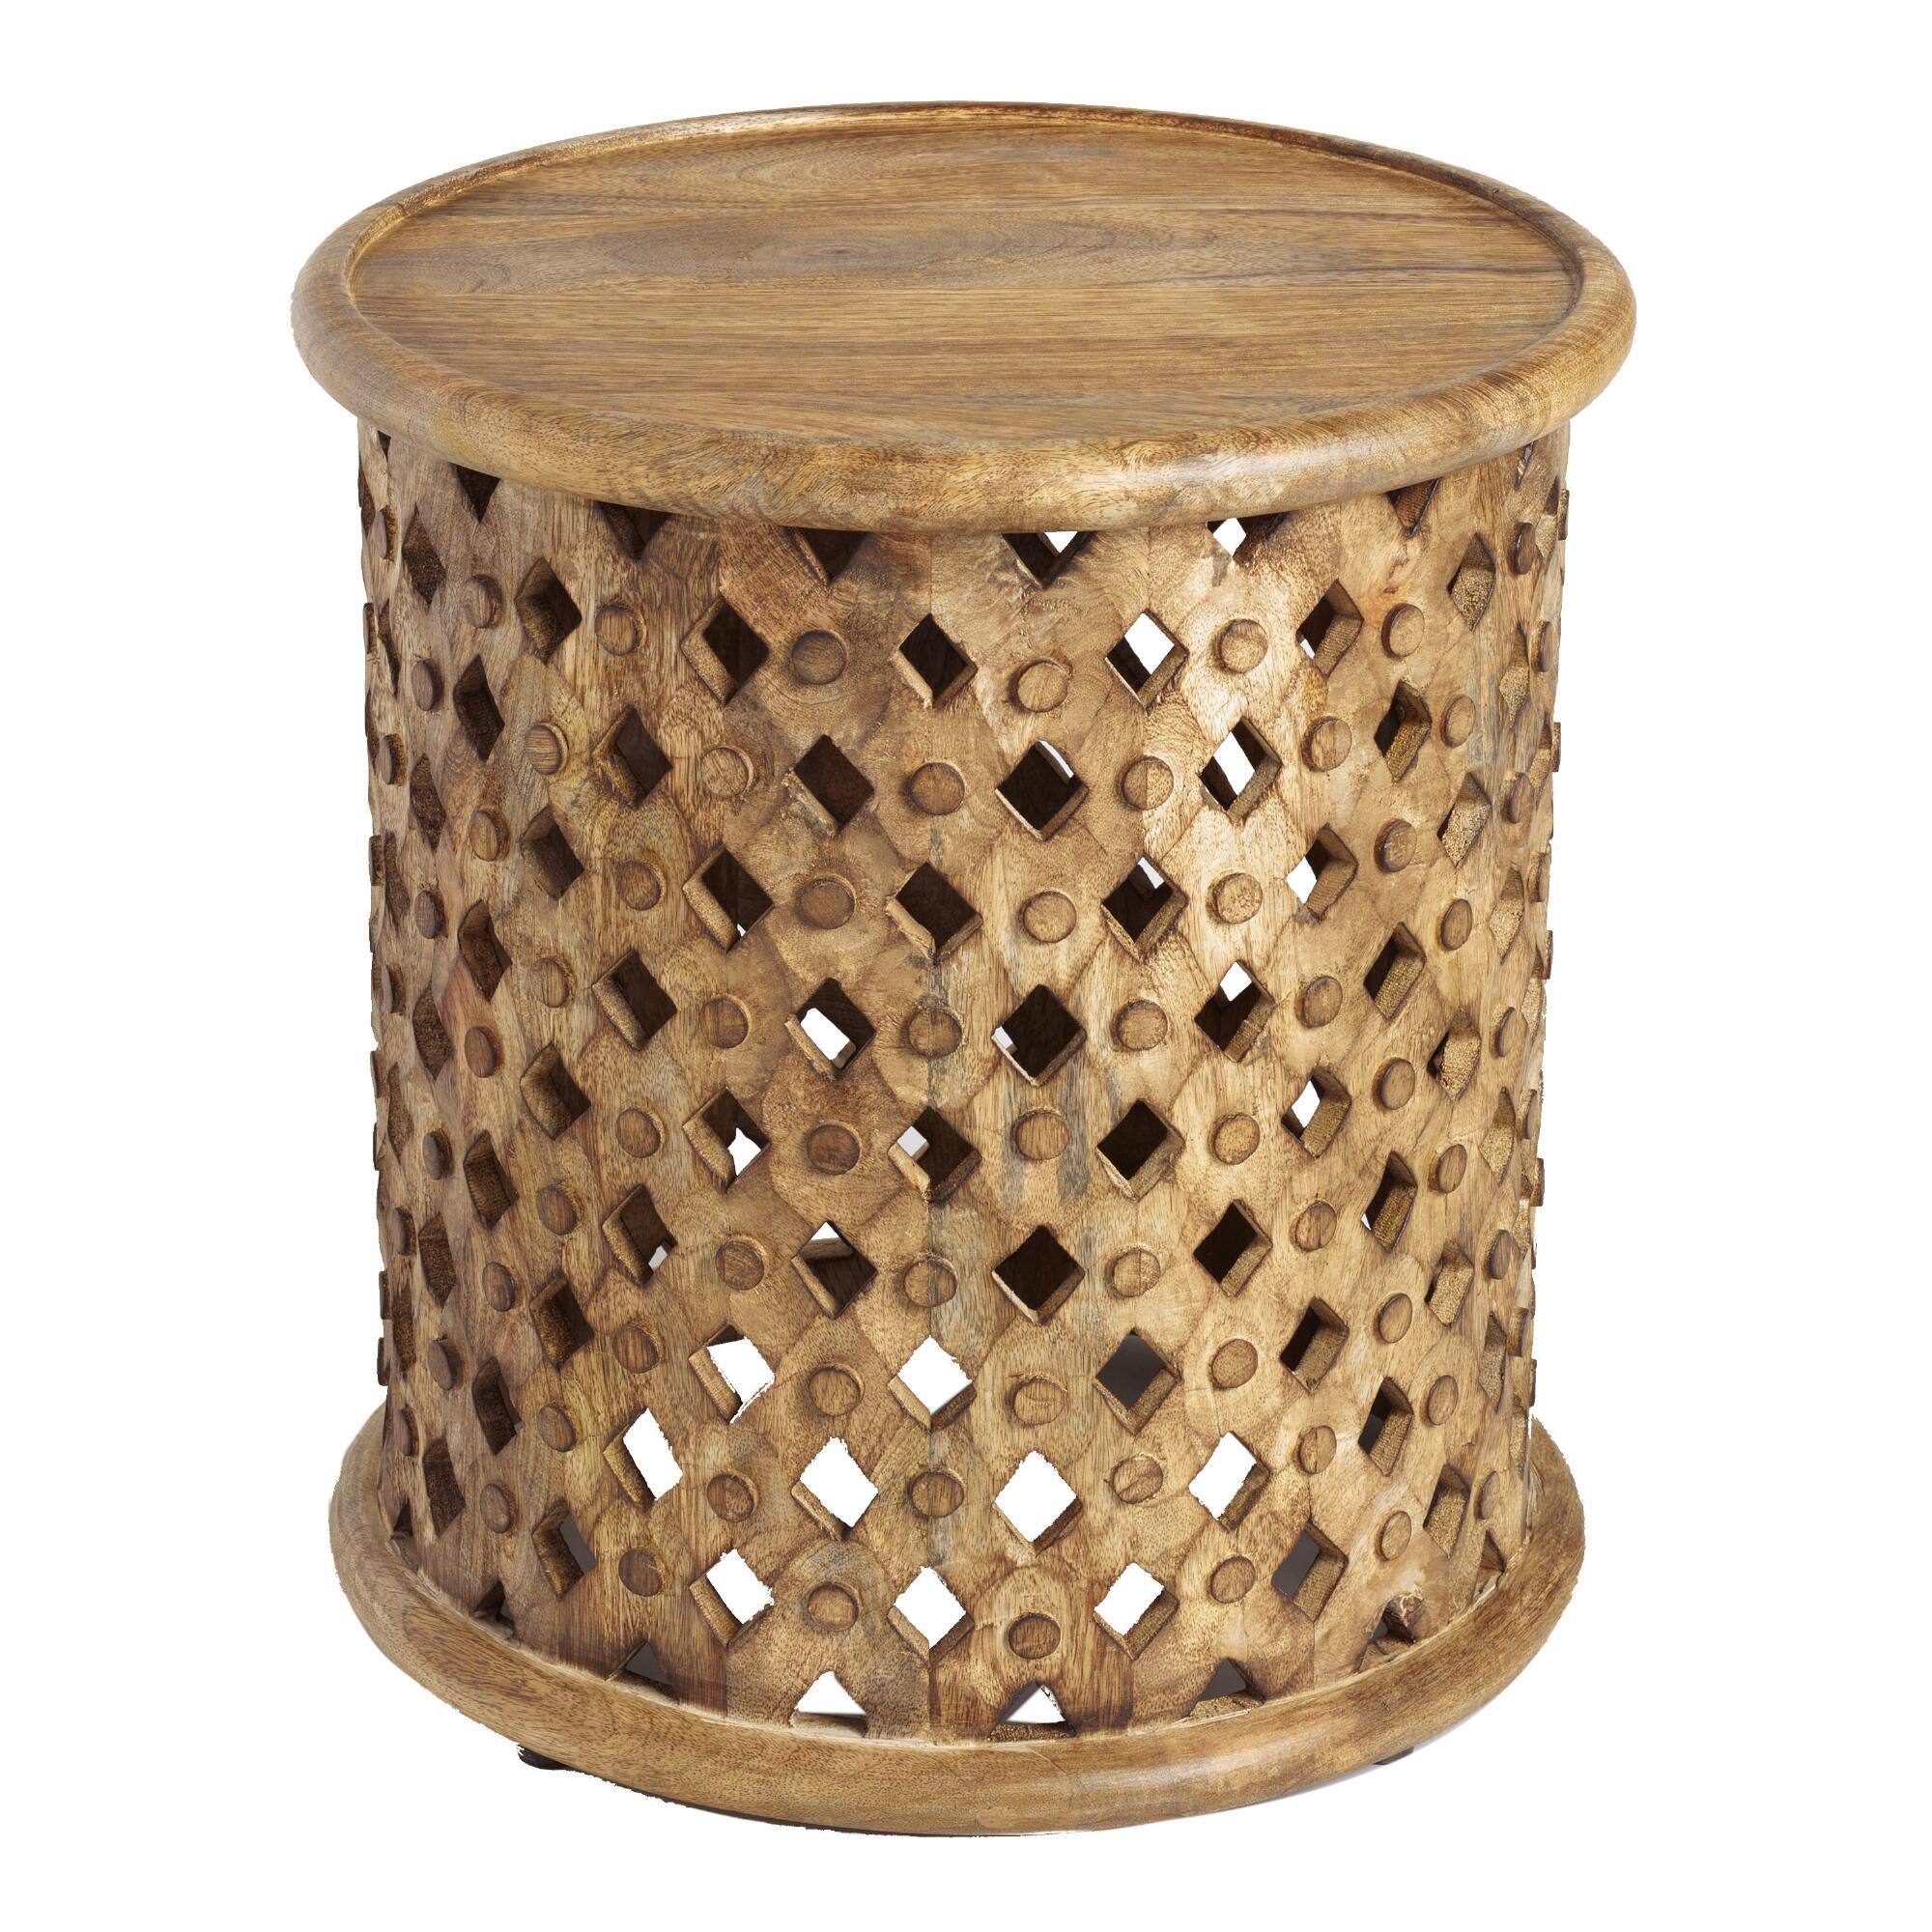 Round Lattice Carved Wood Accent Table: Brown by World Market | World Market